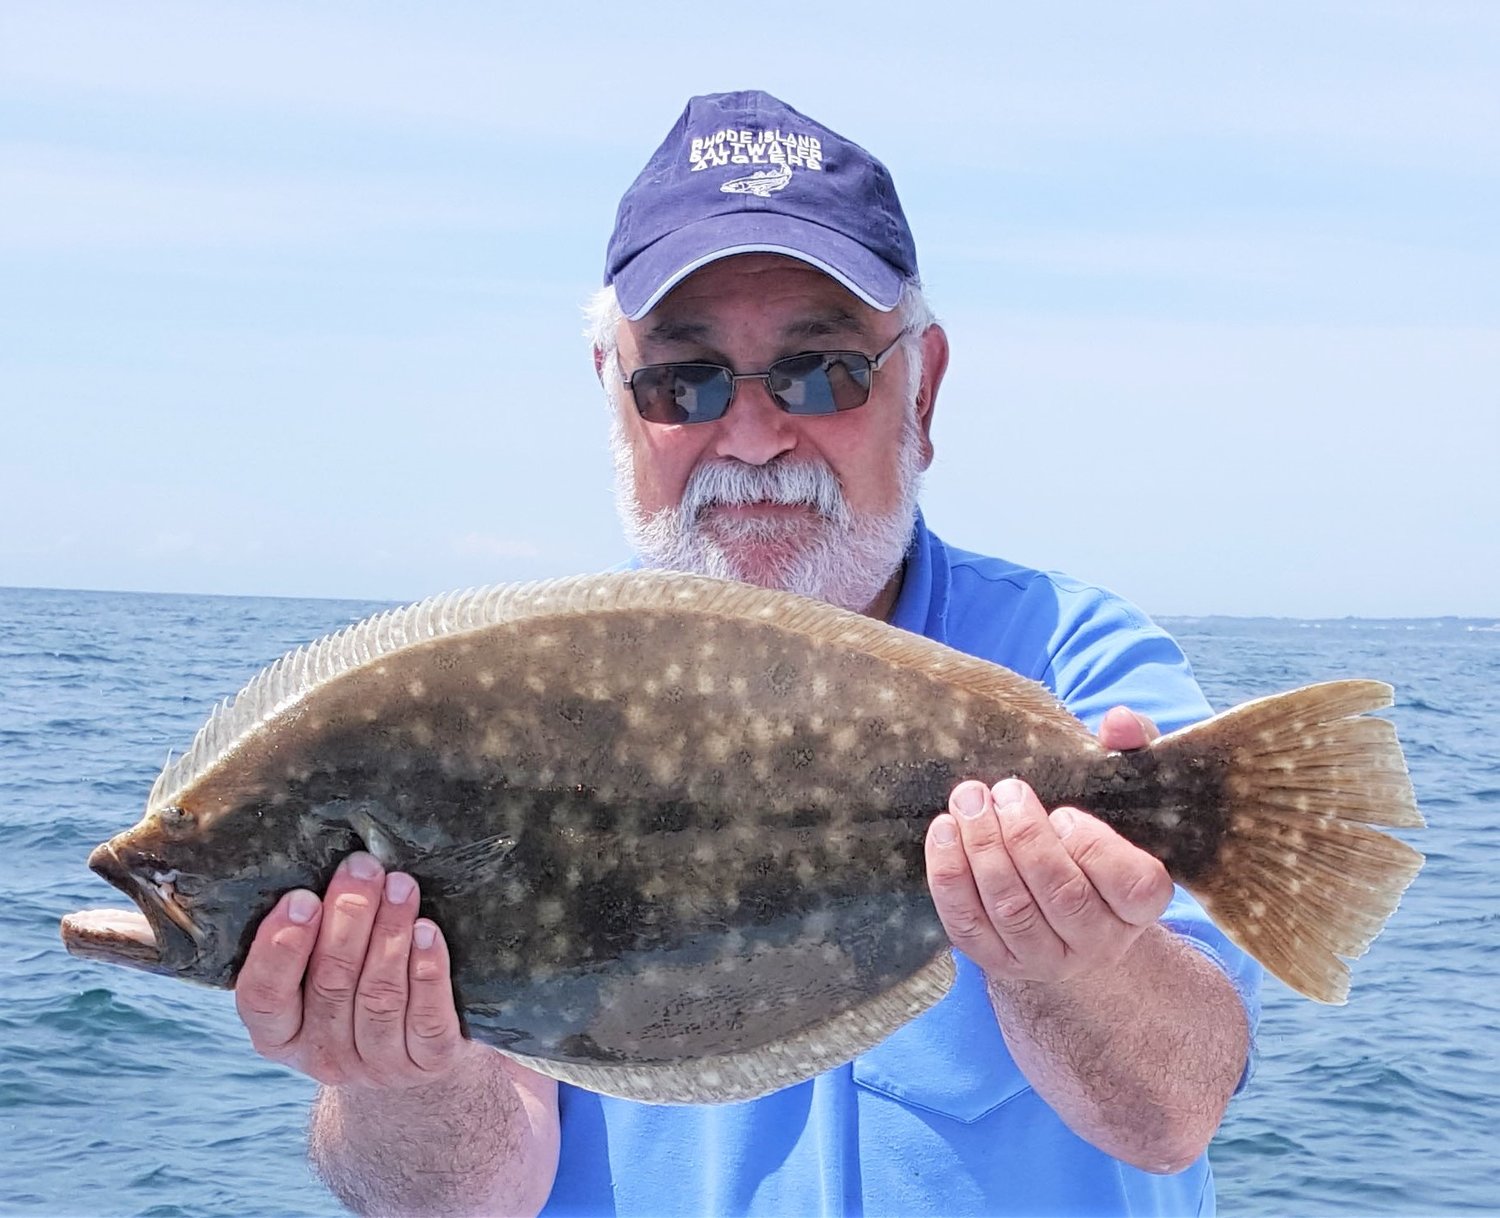 Stephen J. Medeiros of West Warwick, founder, president and executive director of the Rhode Island Saltwater Anglers Association (RISAA), passed away suddenly on Monday, Sept. 13.